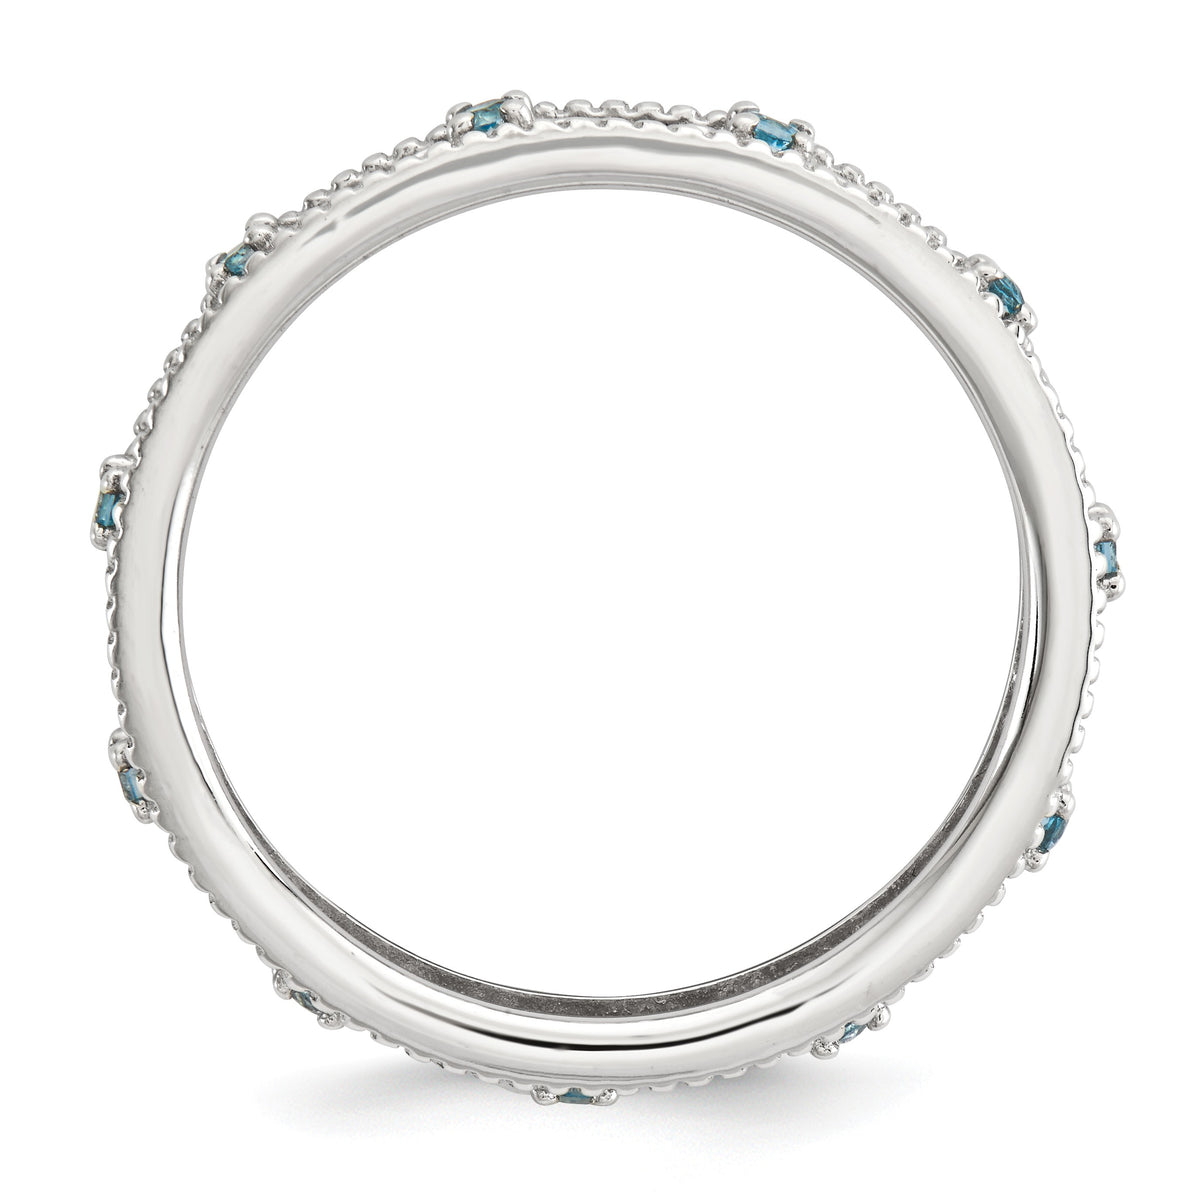 Alternate view of the 3mm Sterling Silver Stackable Expressions Blue Topaz Scroll Band by The Black Bow Jewelry Co.